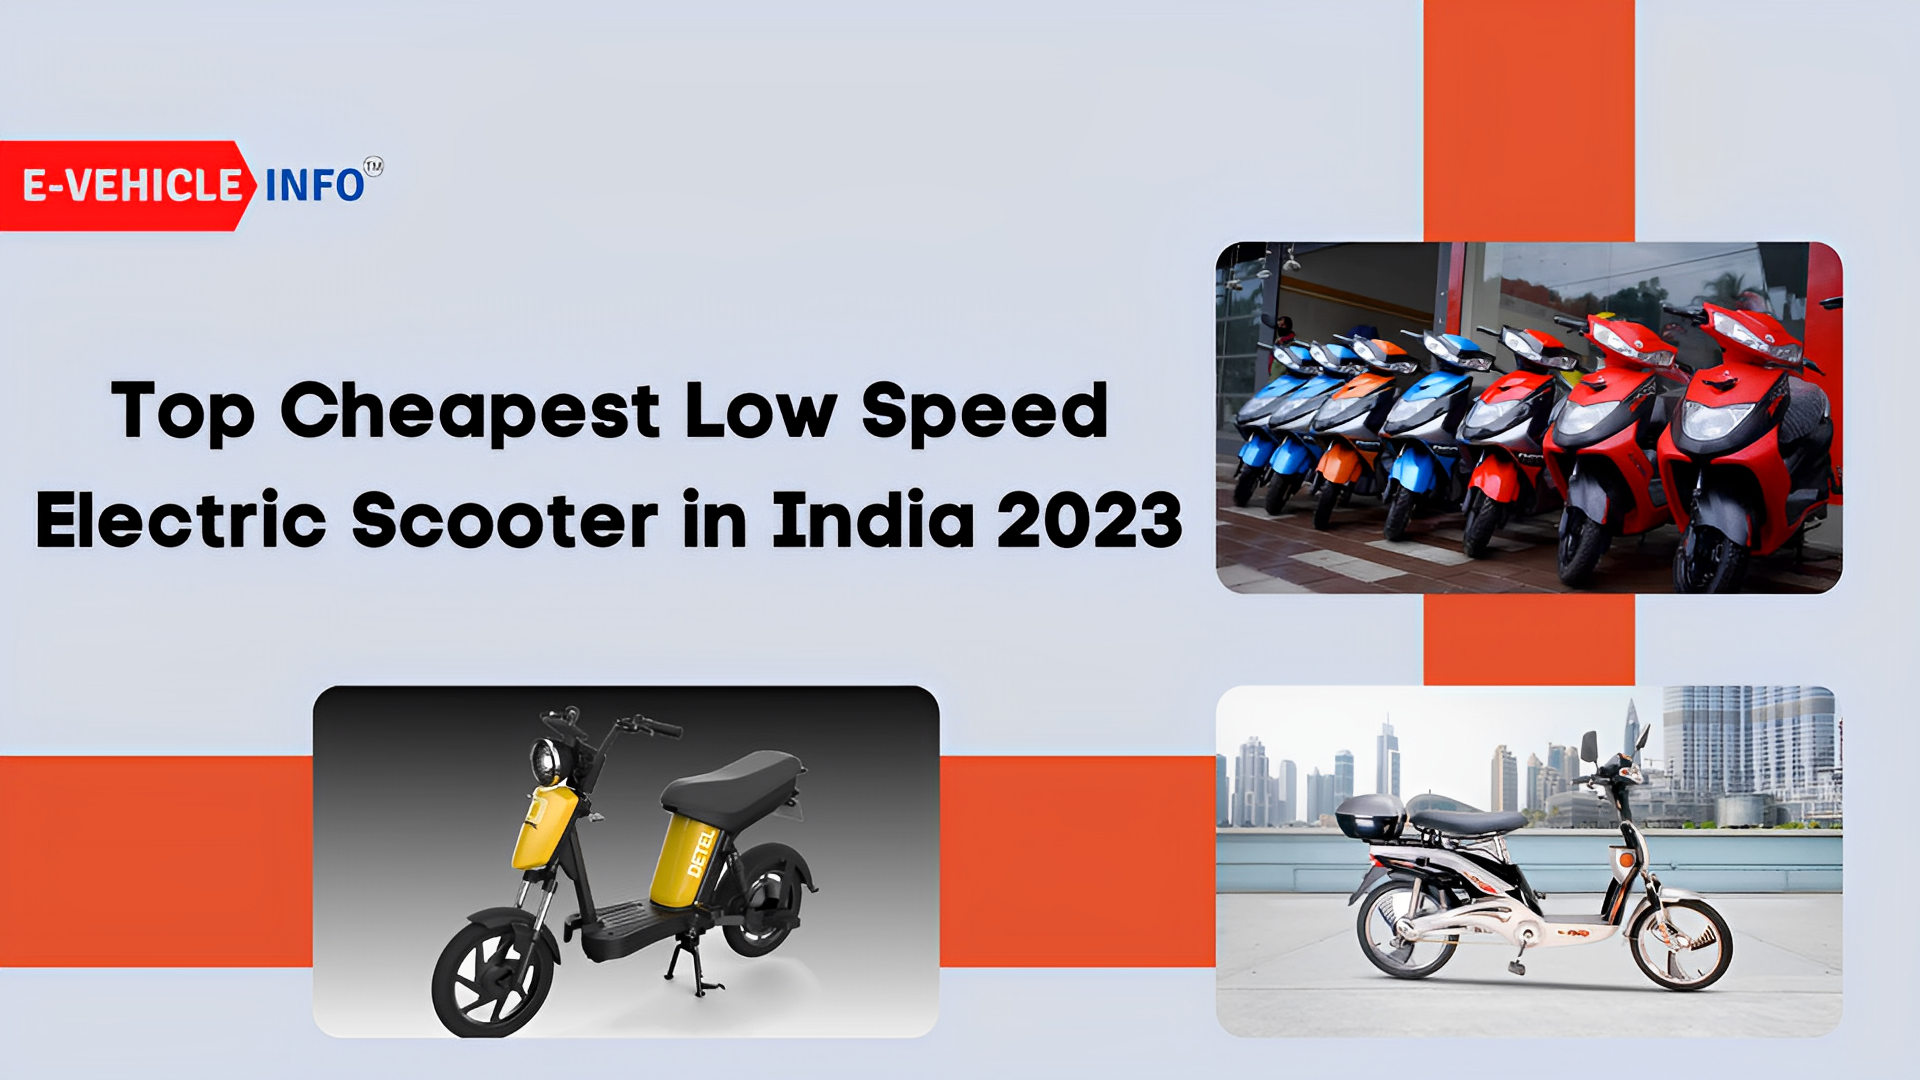 https://e-vehicleinfo.com/top-7-cheapest-low-speed-electric-scooters-in-india-2023/